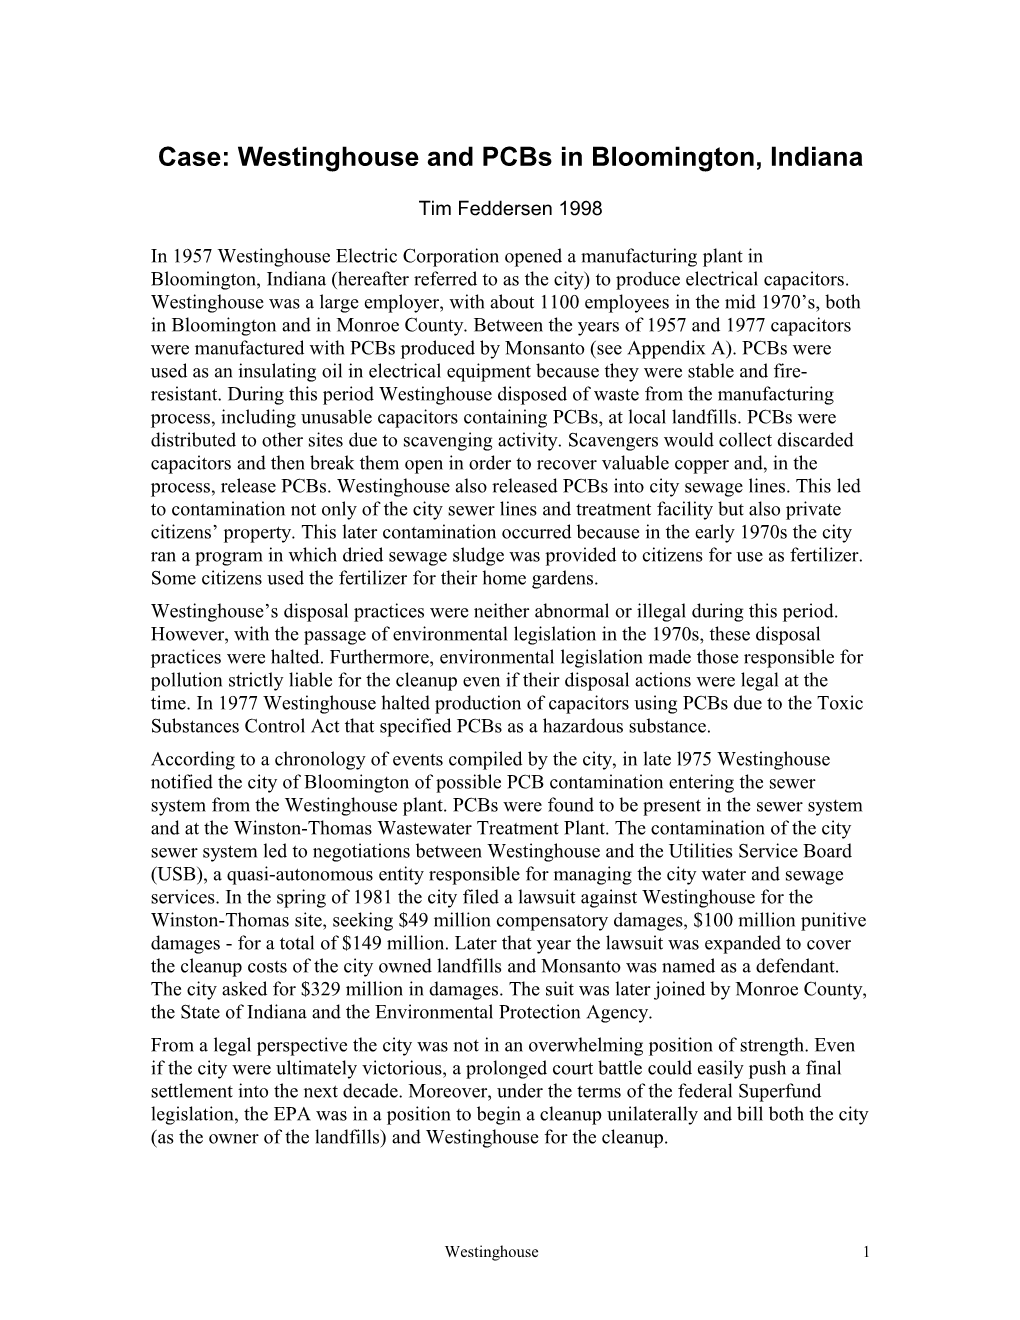 Case: Westinghouse and Pcbs in Bloomington, Indiana